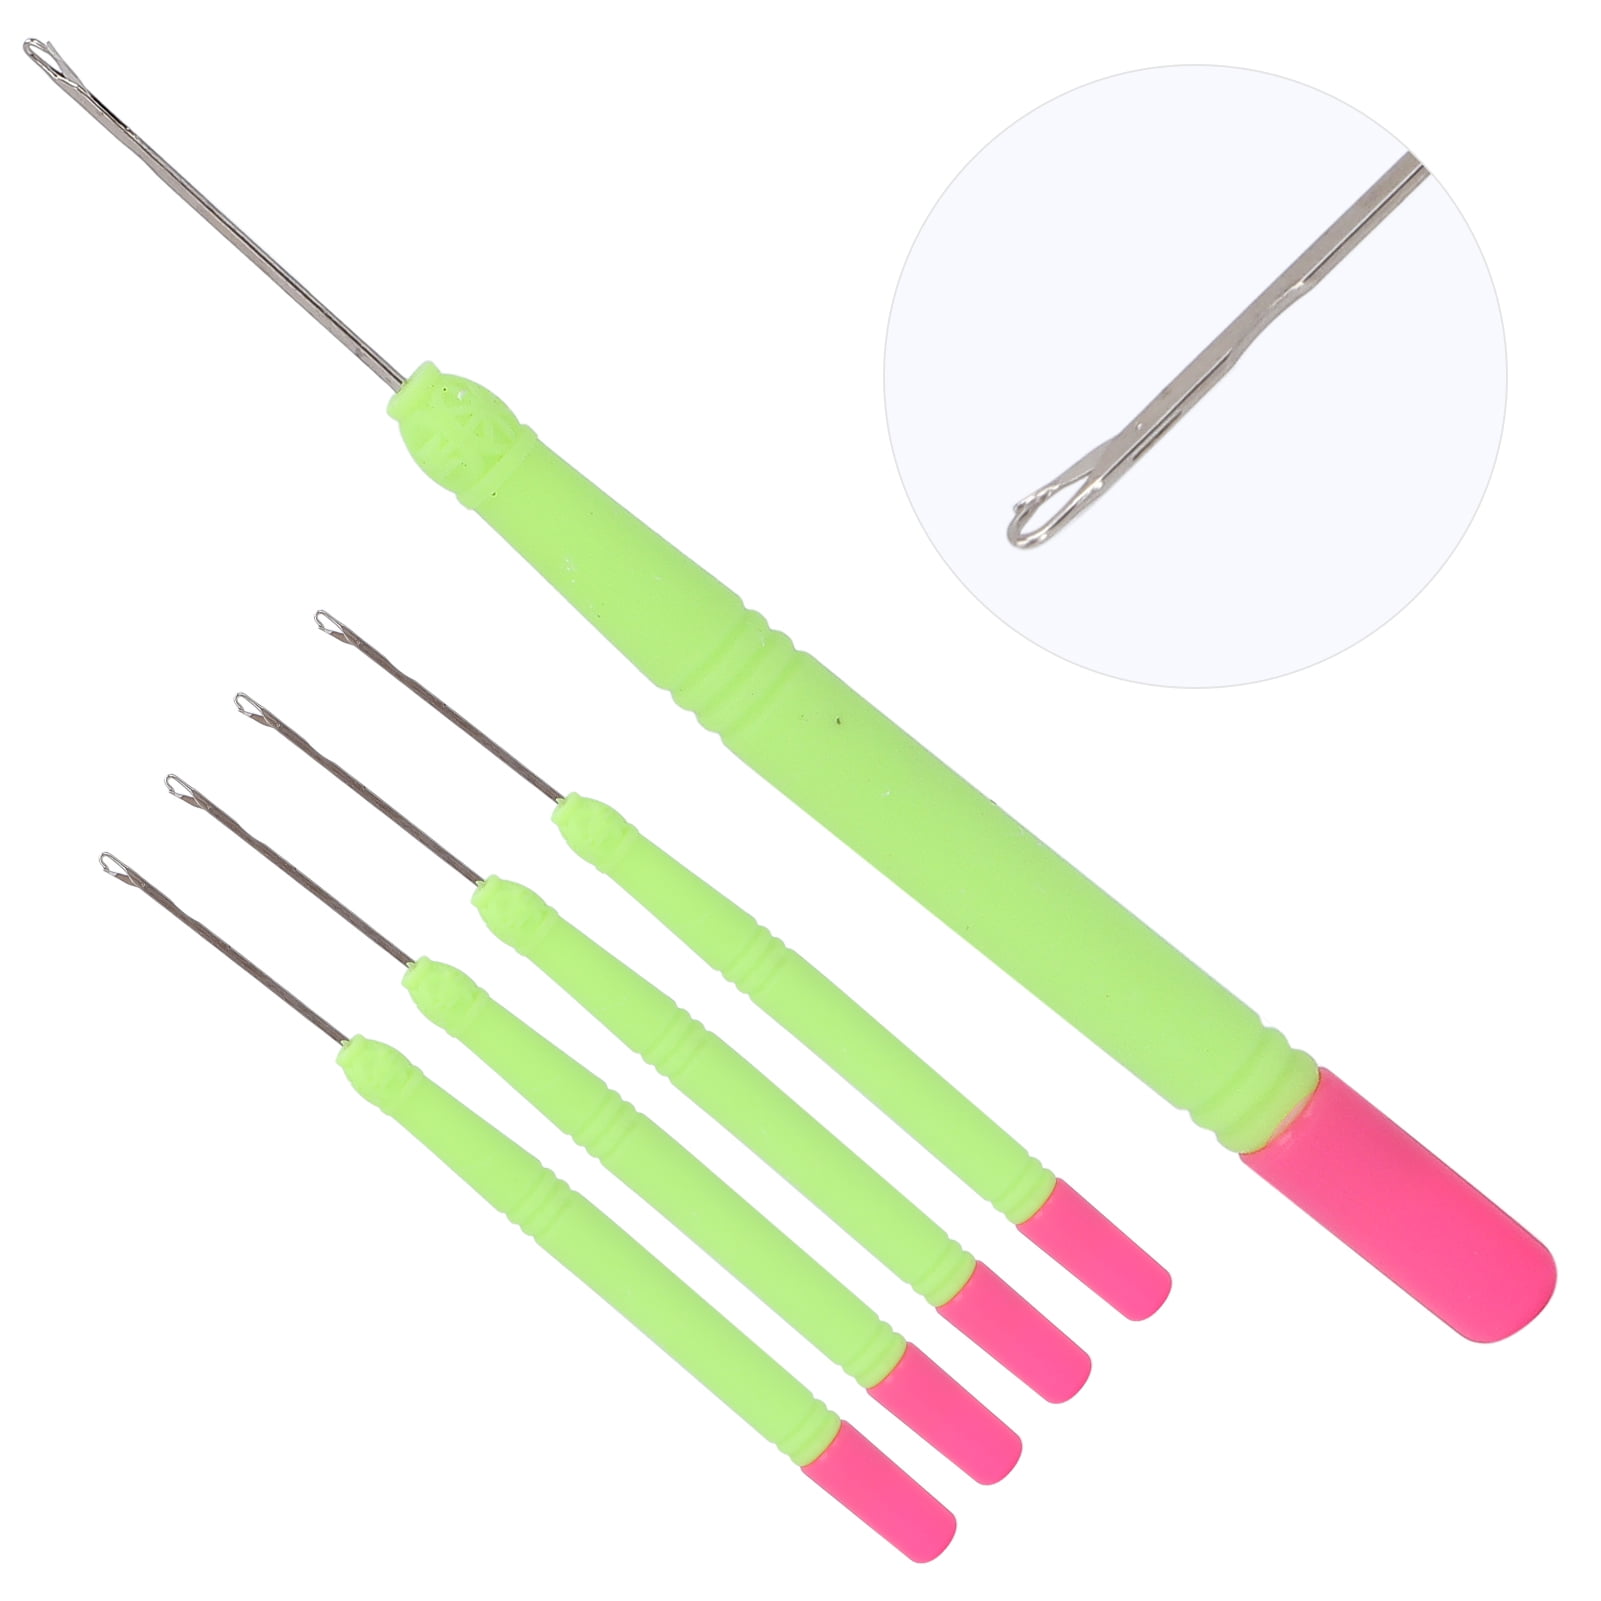 24 Pieces High Quanity Latch Crochet Hair Needle Hook 